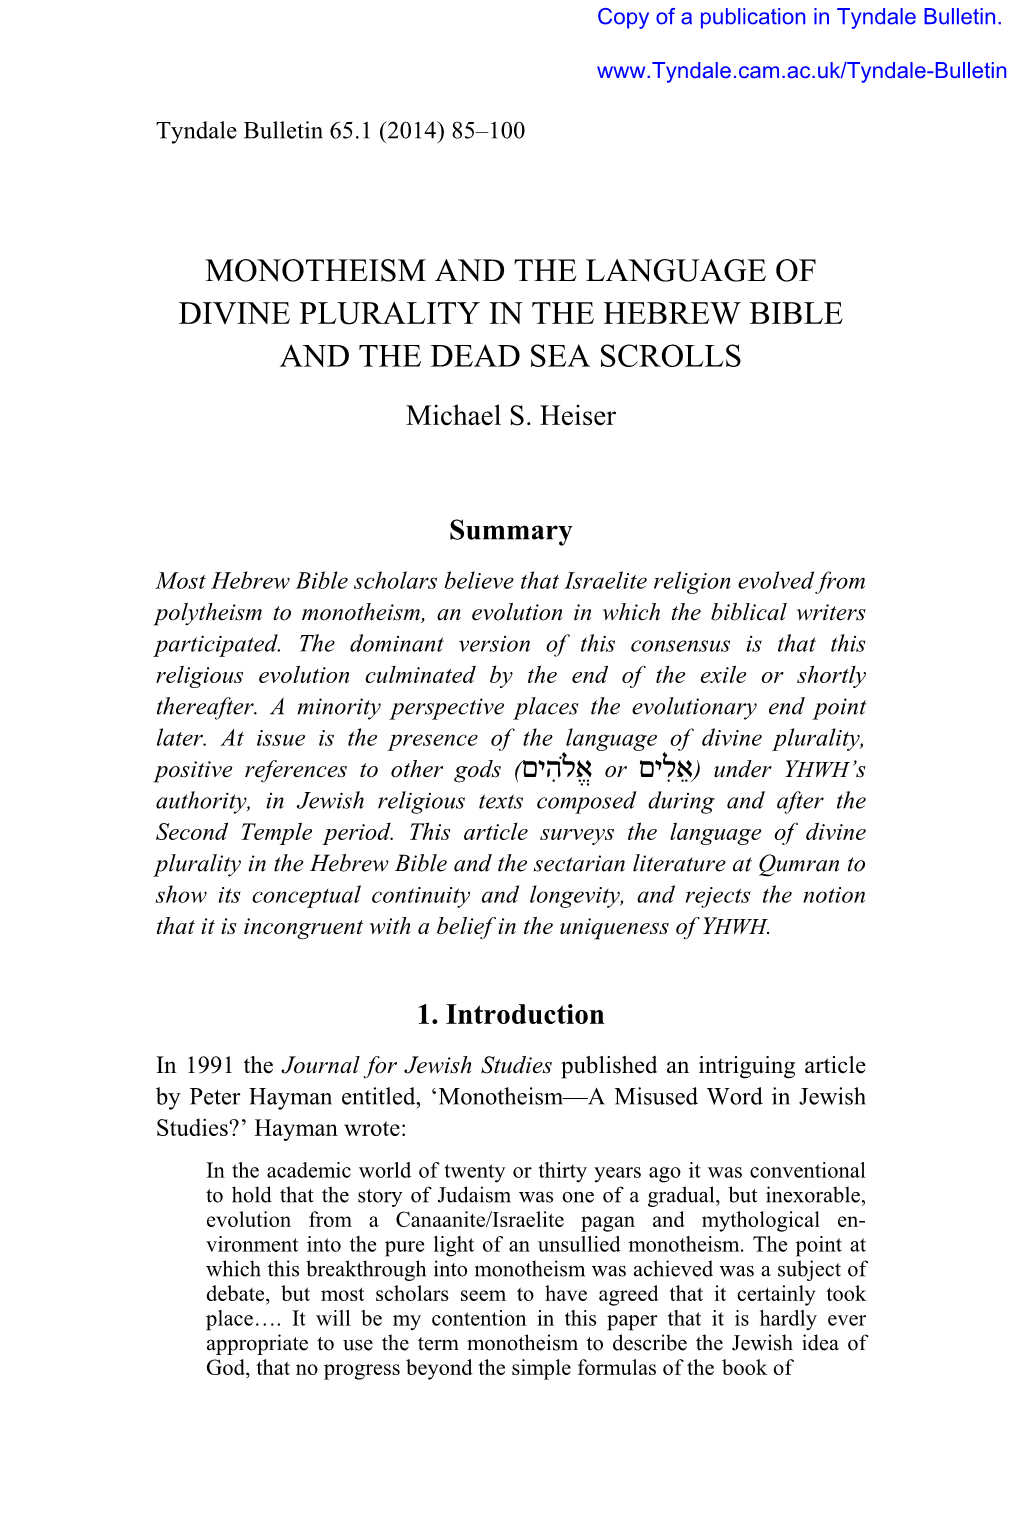 MONOTHEISM and the LANGUAGE of DIVINE PLURALITY in the HEBREW BIBLE and the DEAD SEA SCROLLS Michael S